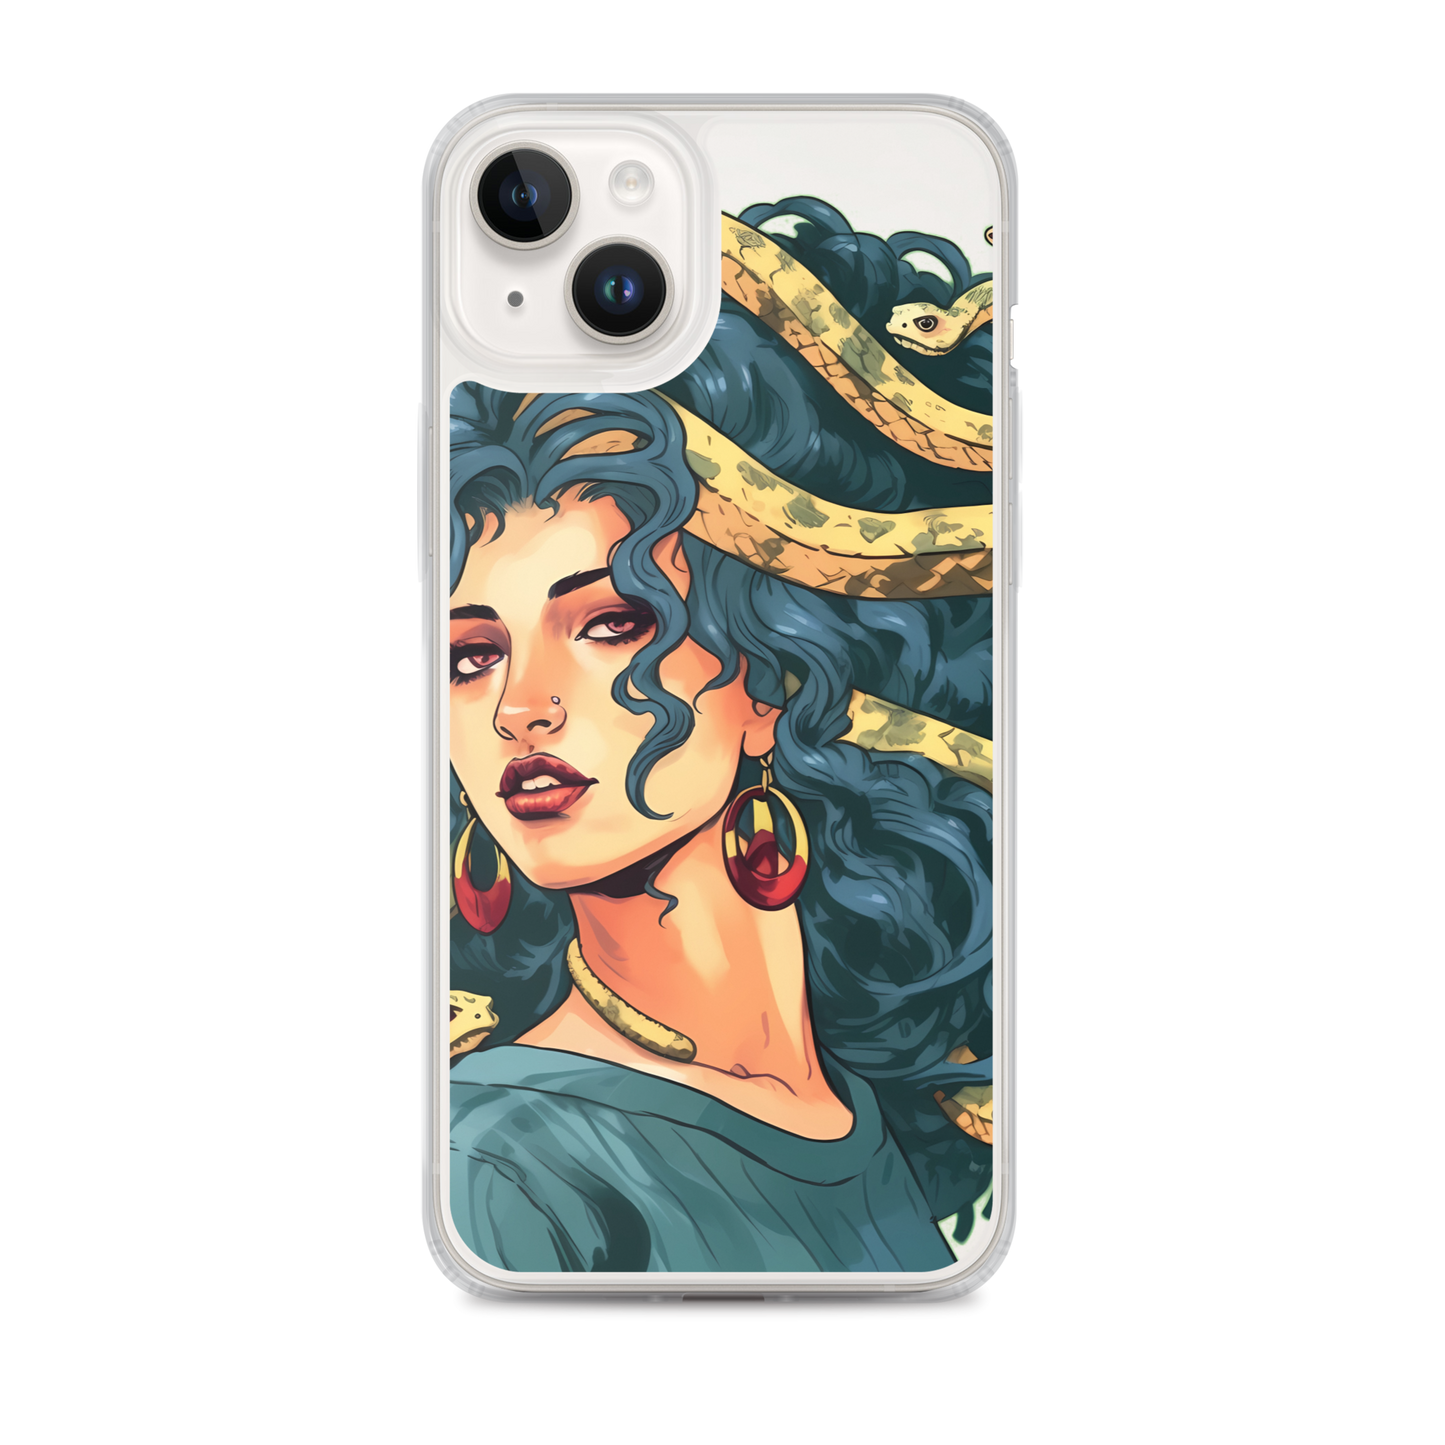 Medusa Enchantment: Cool iPhone Case with Mythical Charm